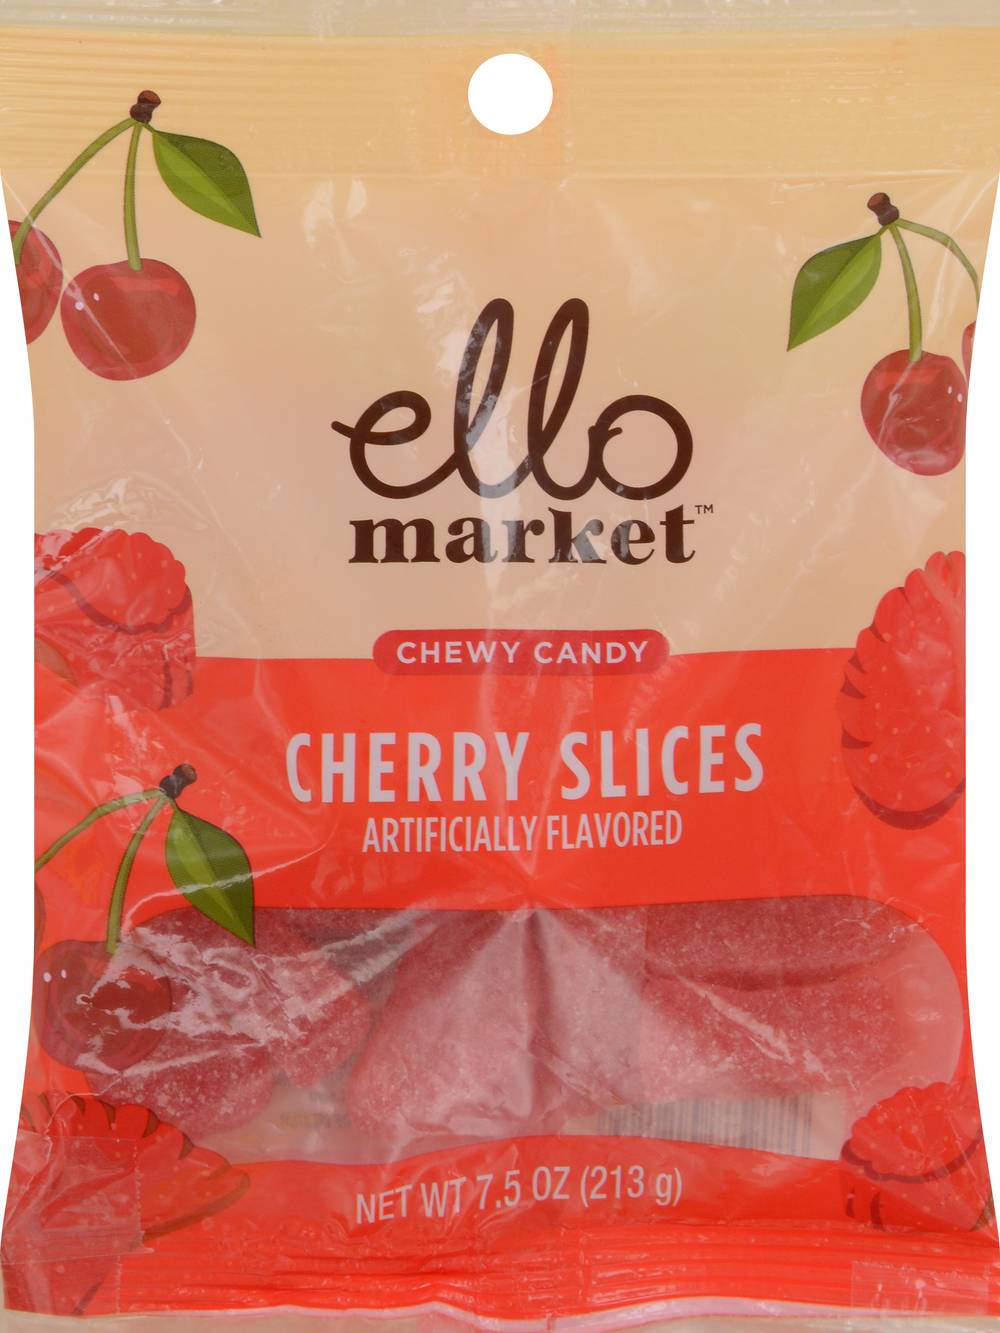 Ello Market Cherry Slices Chewy Candy